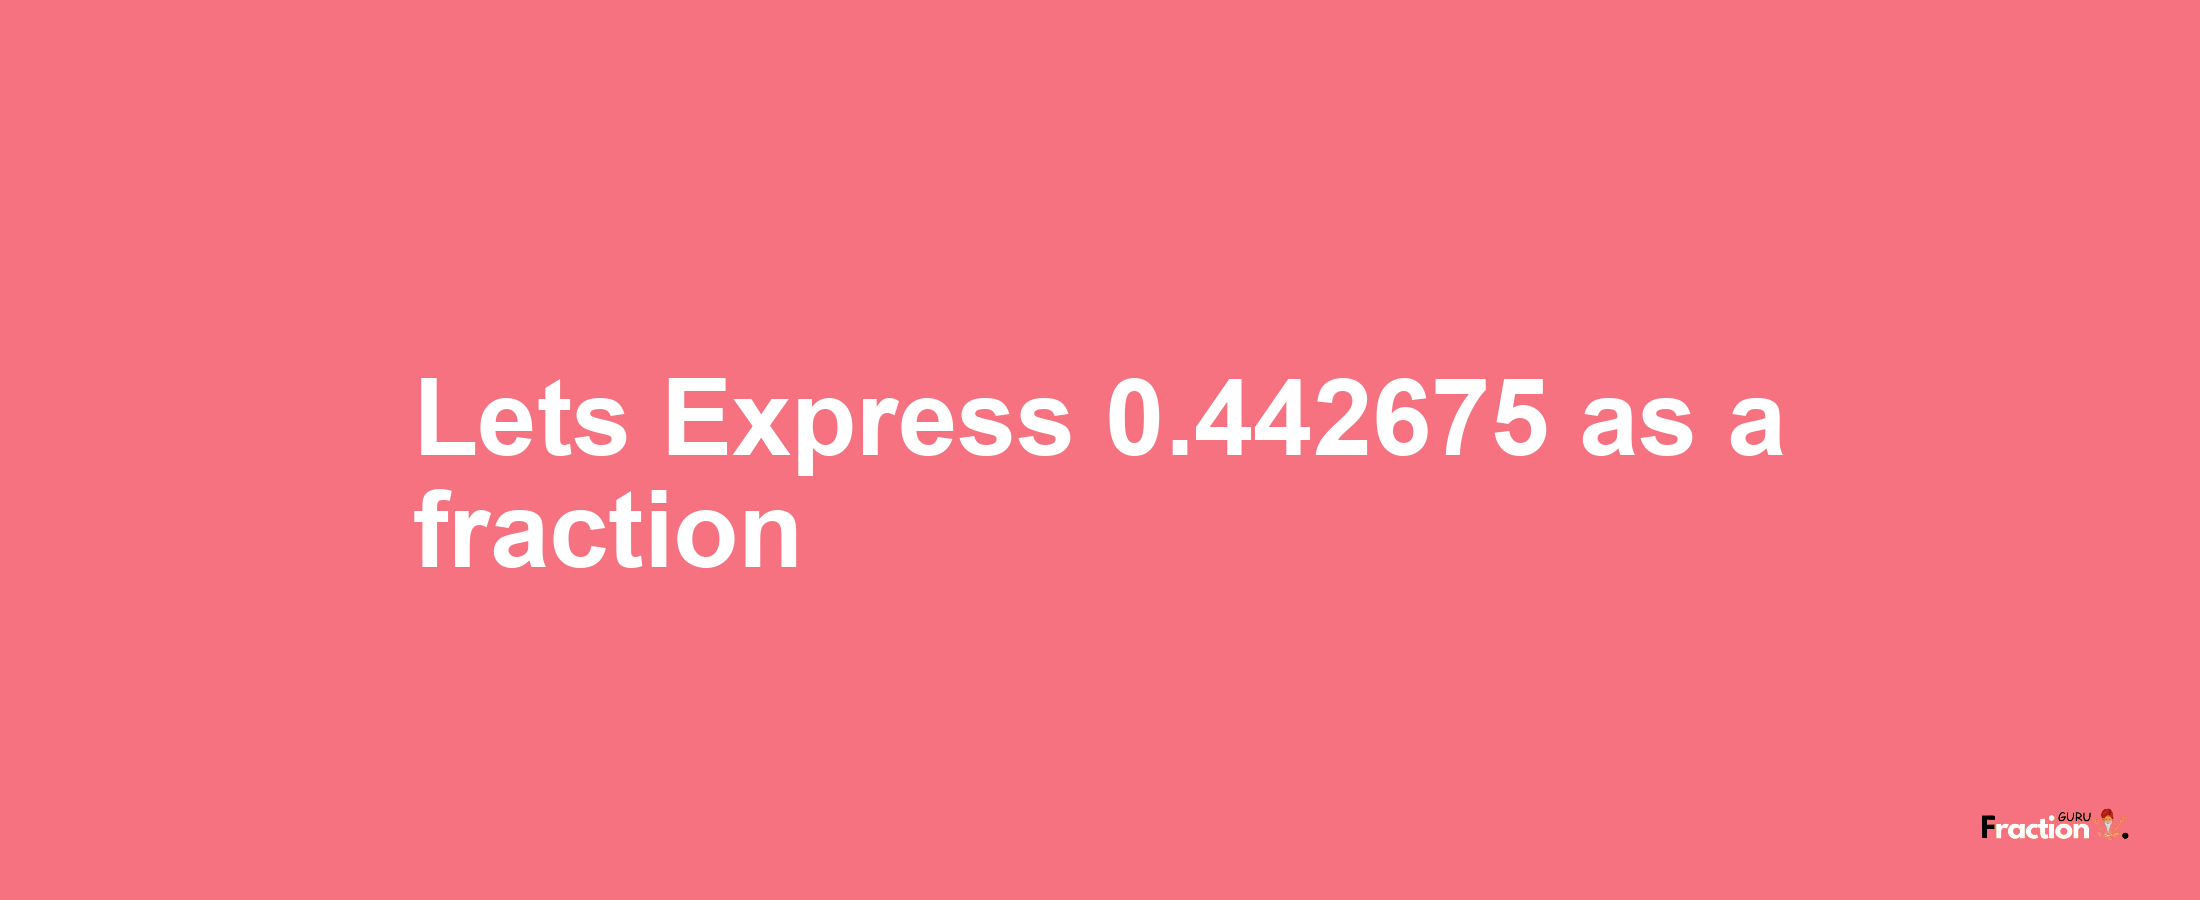 Lets Express 0.442675 as afraction